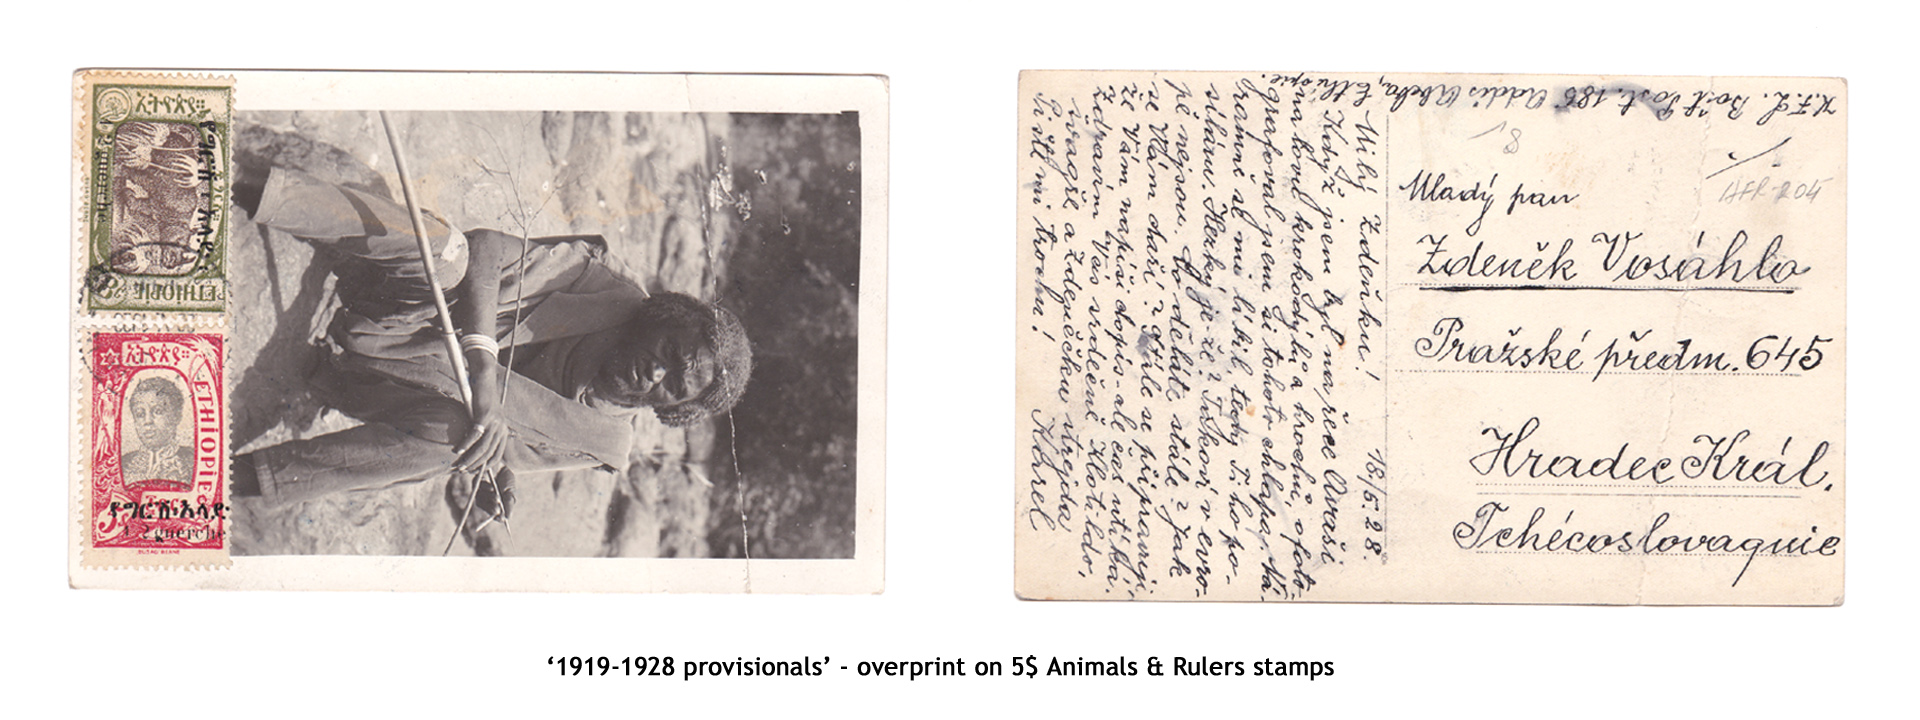 1919-1928 provisionals’ – overprint on 5$ Animals & Rulers stamps